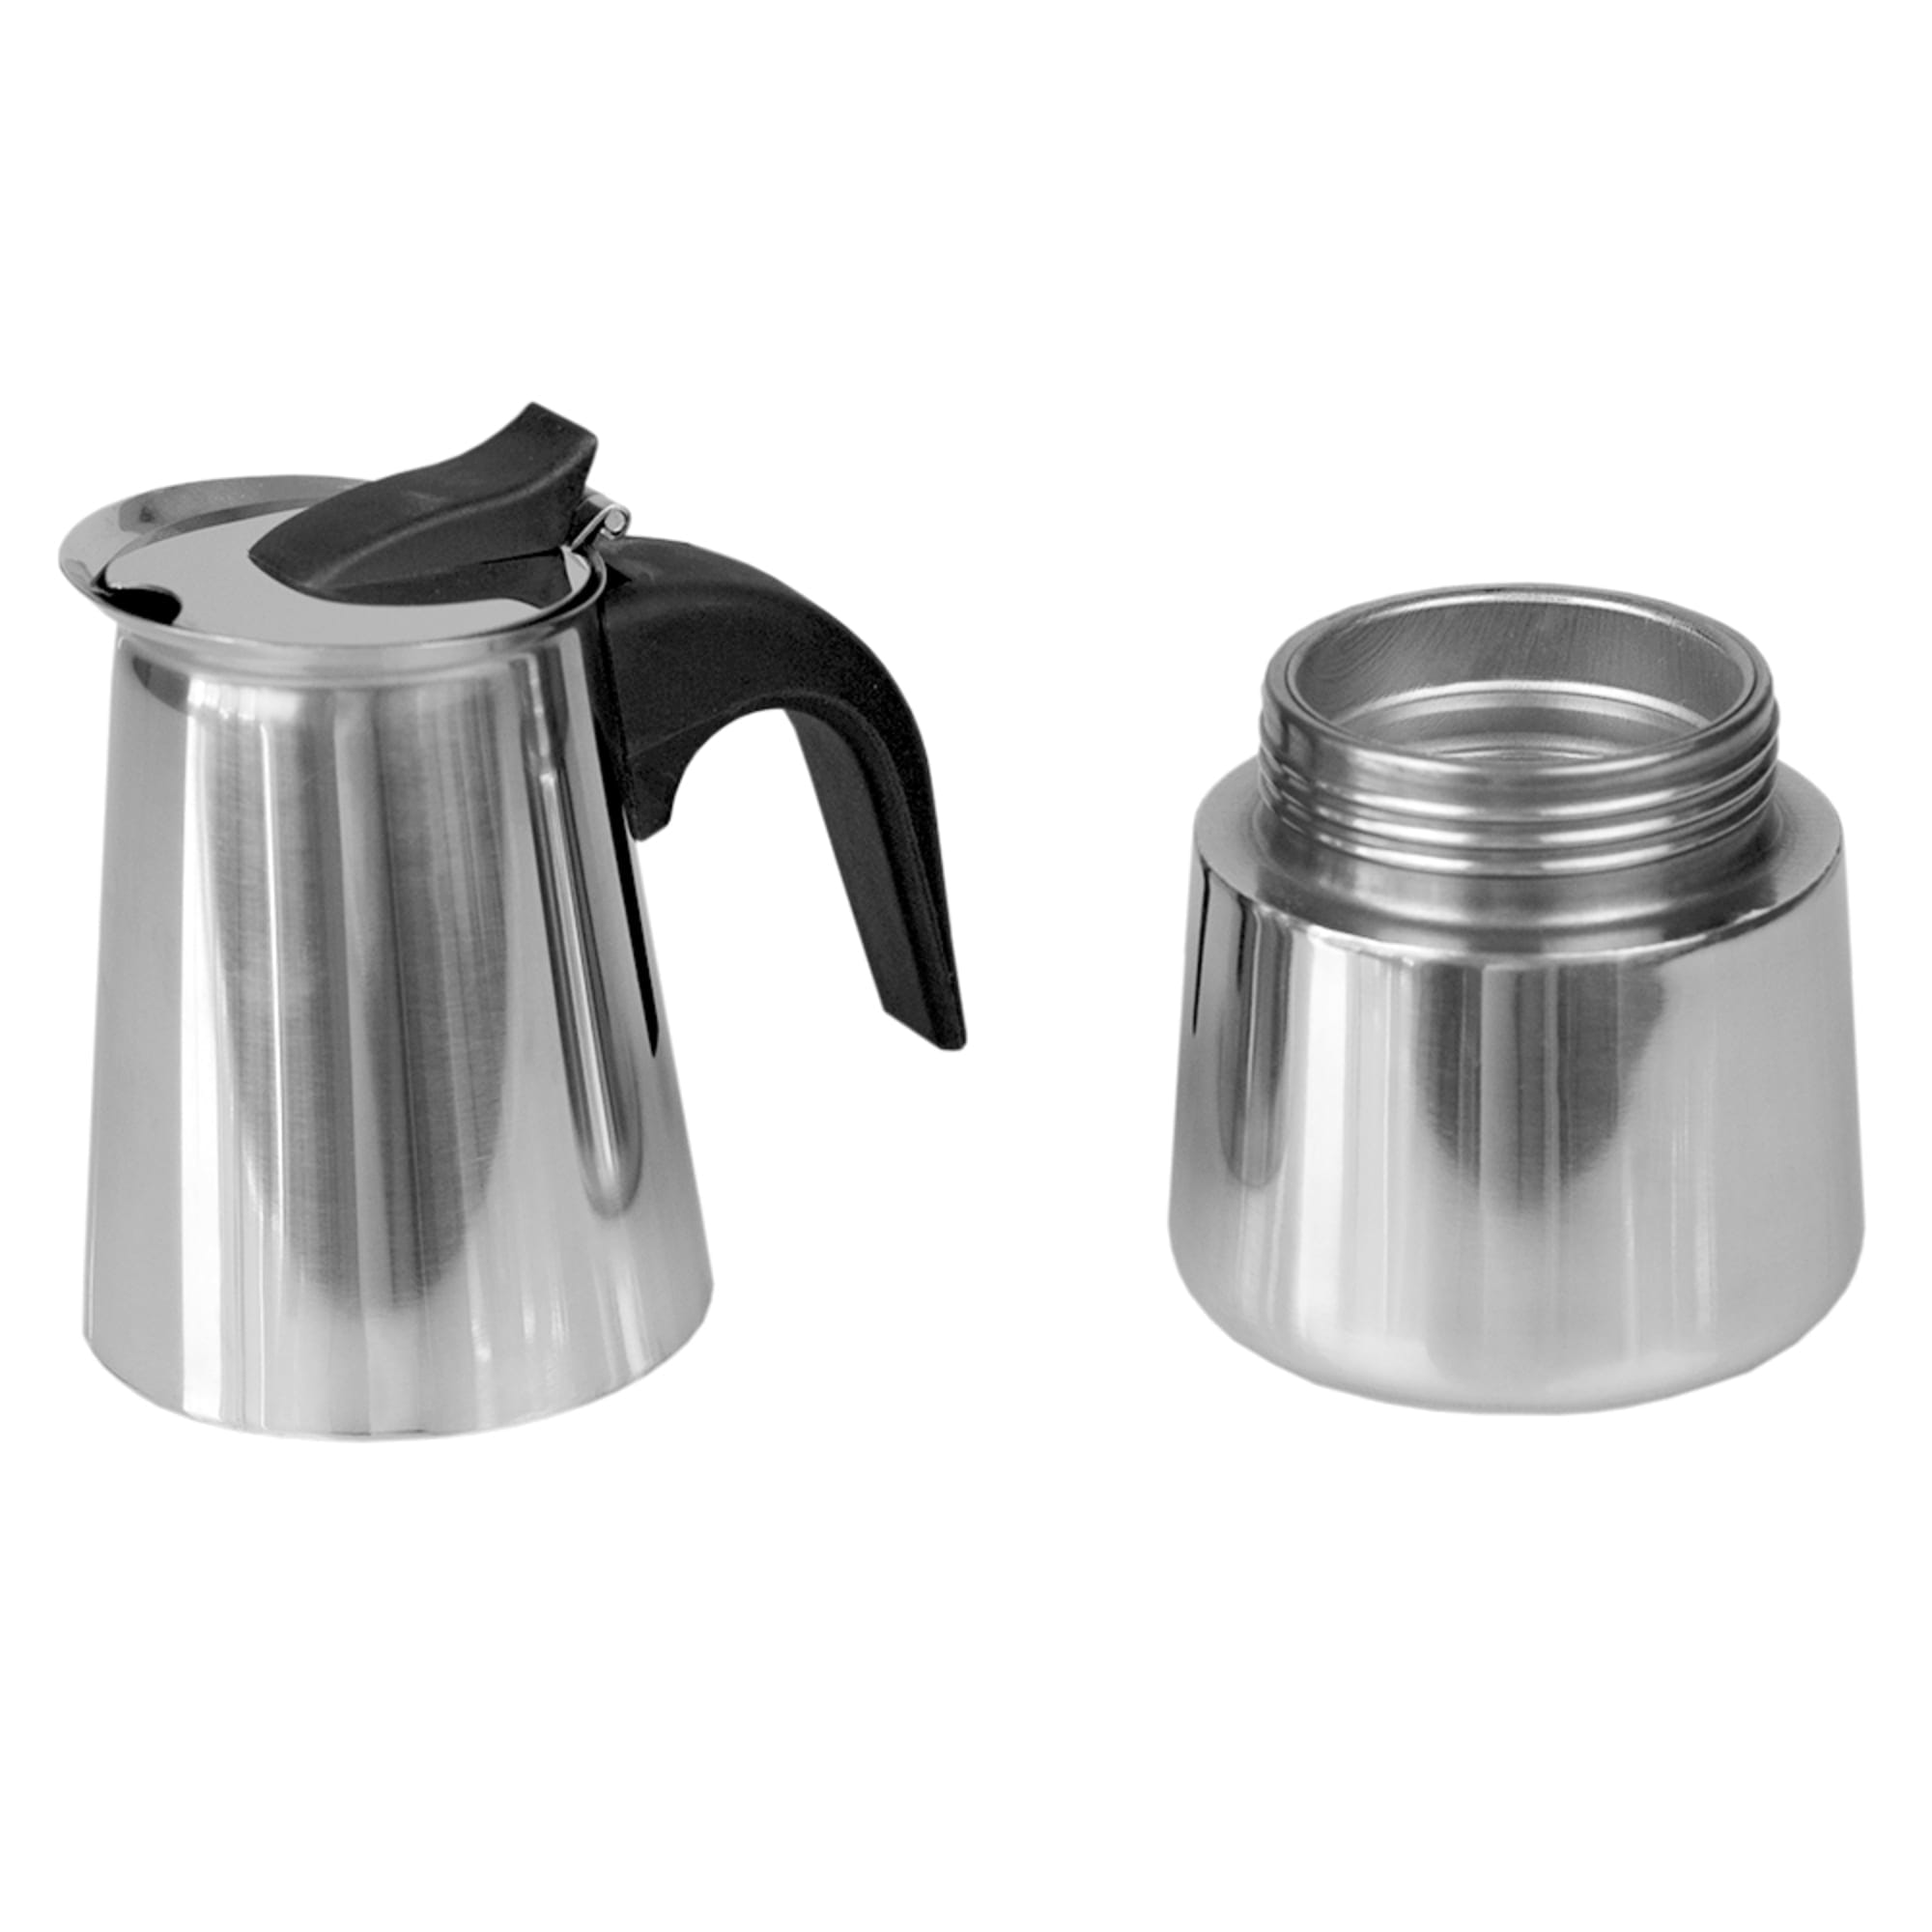 Home Basics 4 Cup Demitasse Shot Stainless Steel Stovetop Espresso Maker, Silver $8.00 EACH, CASE PACK OF 12